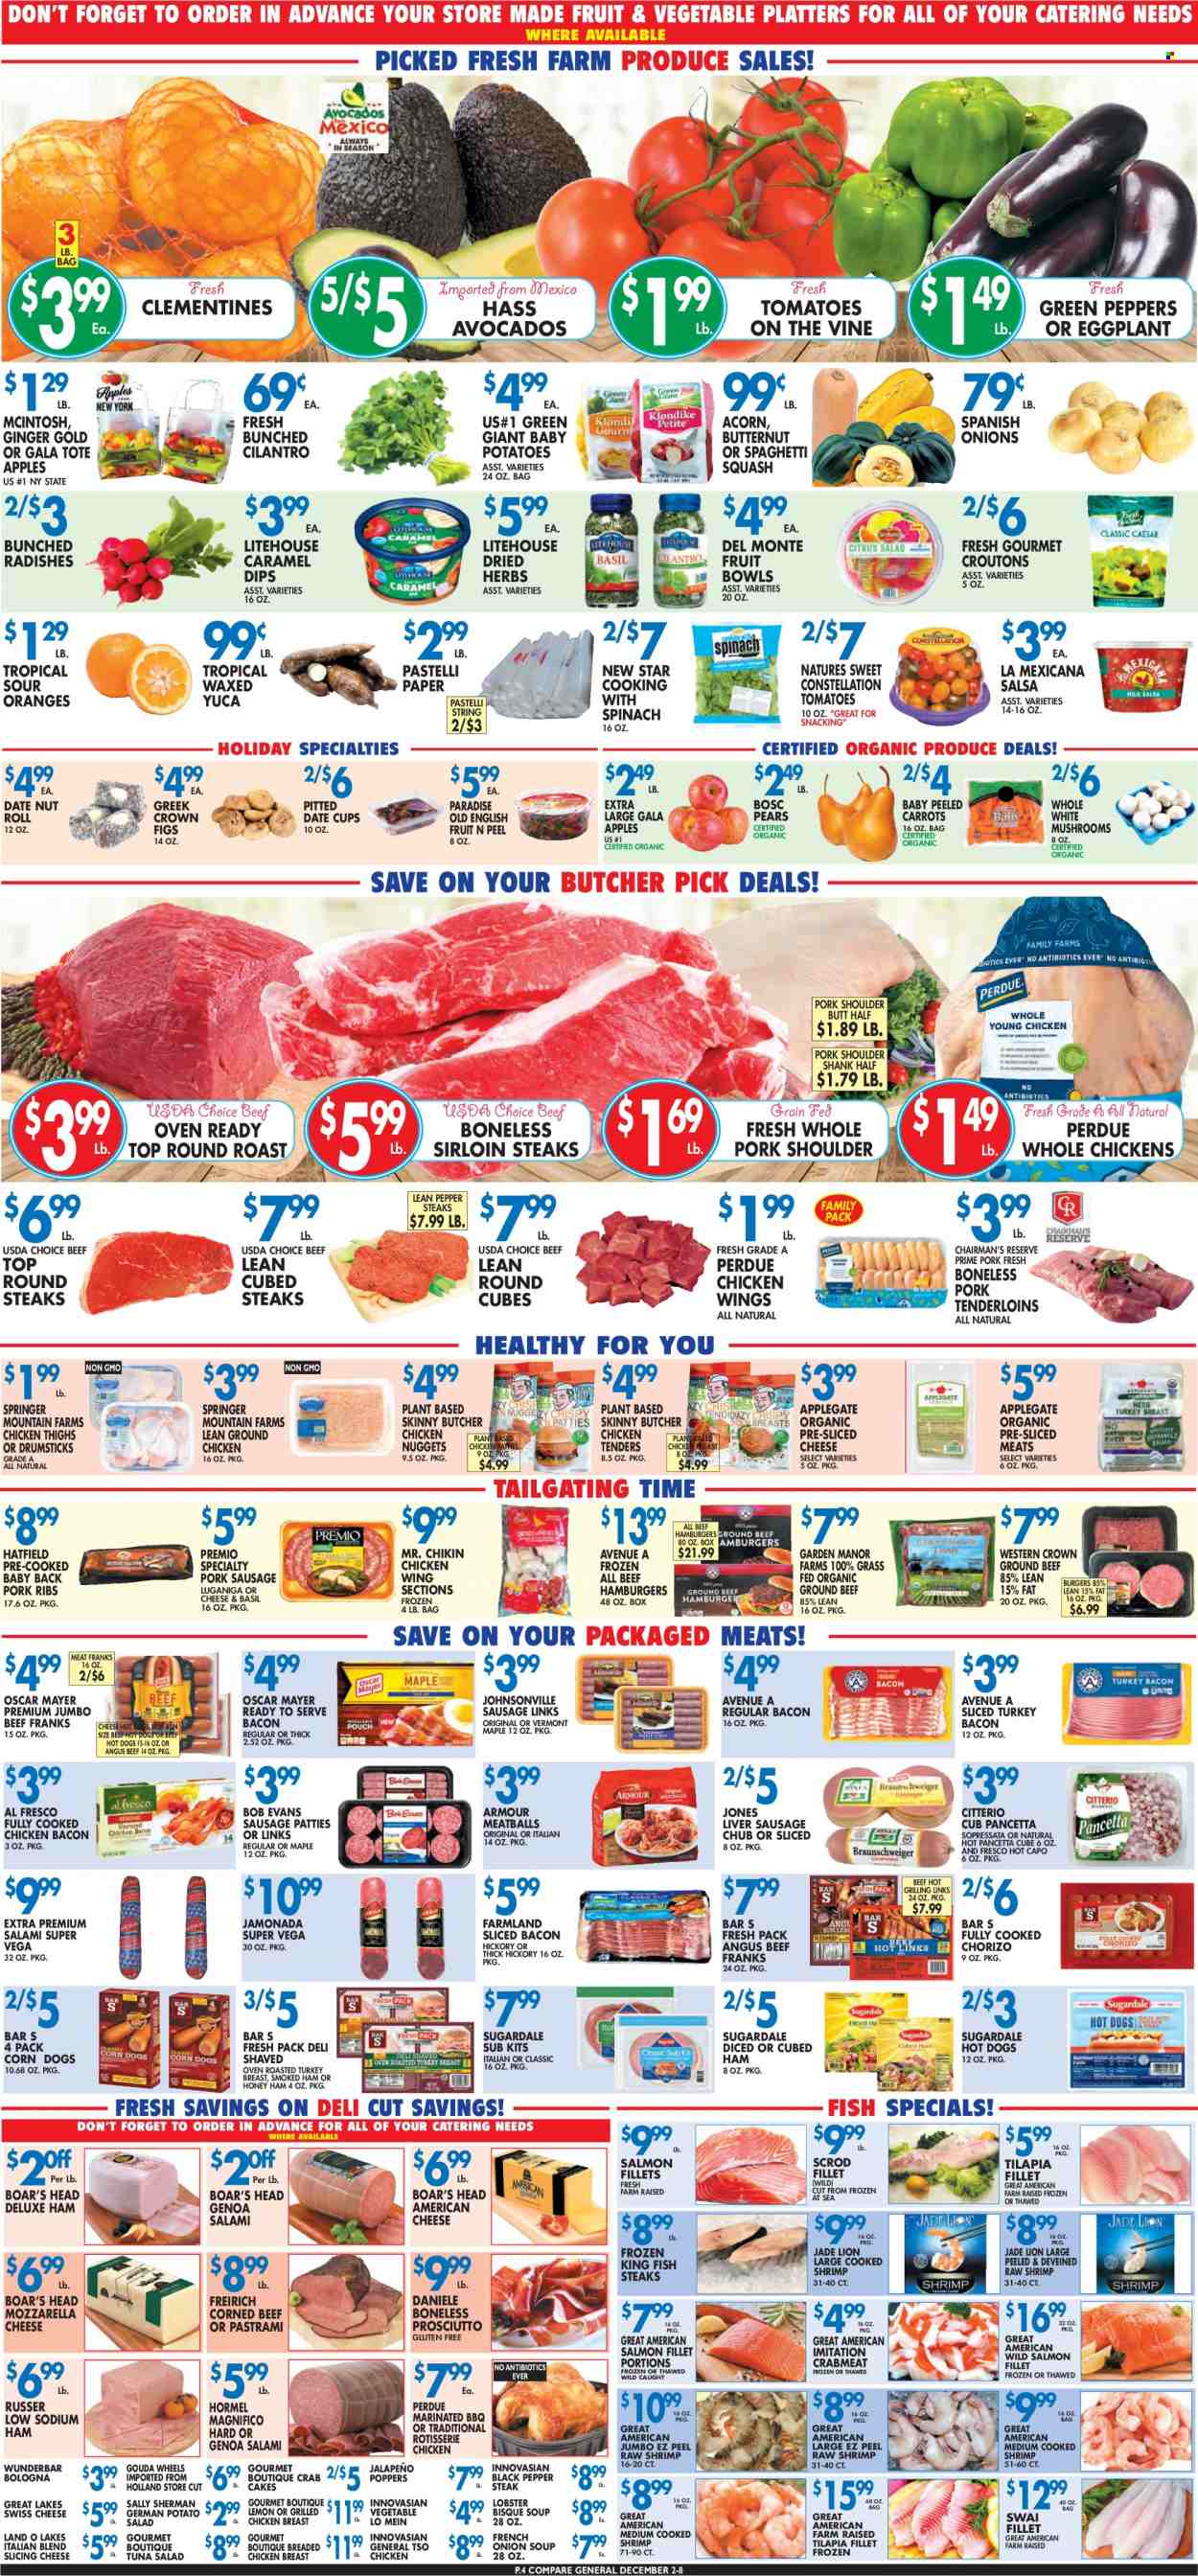 thumbnail - Compare Foods Flyer - 12/02/2022 - 12/08/2022 - Sales products - mushrooms, carrots, ginger, radishes, tomatoes, potatoes, peppers, jalapeño, eggplant, apples, avocado, figs, Gala, pears, oranges, crab meat, salmon, salmon fillet, tilapia, tuna, fish, king fish, shrimps, fish steak, swai fillet, crab cake, hot dog, chicken roast, onion soup, chicken tenders, meatballs, soup, nuggets, hamburger, fried chicken, lobster soup, Perdue®, Bob Evans, Hormel, Sugardale, bacon, salami, sliced turkey, turkey bacon, ham, prosciutto, pancetta, pastrami, chorizo, smoked ham, bologna sausage, Johnsonville, Oscar Mayer, liver sausage, sausage, pork sausage, potato salad, tuna salad, corned beef, american cheese, gouda, sliced cheese, swiss cheese, chicken wings, chicken patties, croutons, Del Monte, cilantro, black pepper, caramel, salsa, dried figs, ground chicken, whole chicken, chicken thighs, beef meat, ground beef, steak, round roast, sirloin steak, pork meat, pork ribs, pork shoulder, pork tenderloin, pork back ribs, butternut squash, clementines. Page 4.